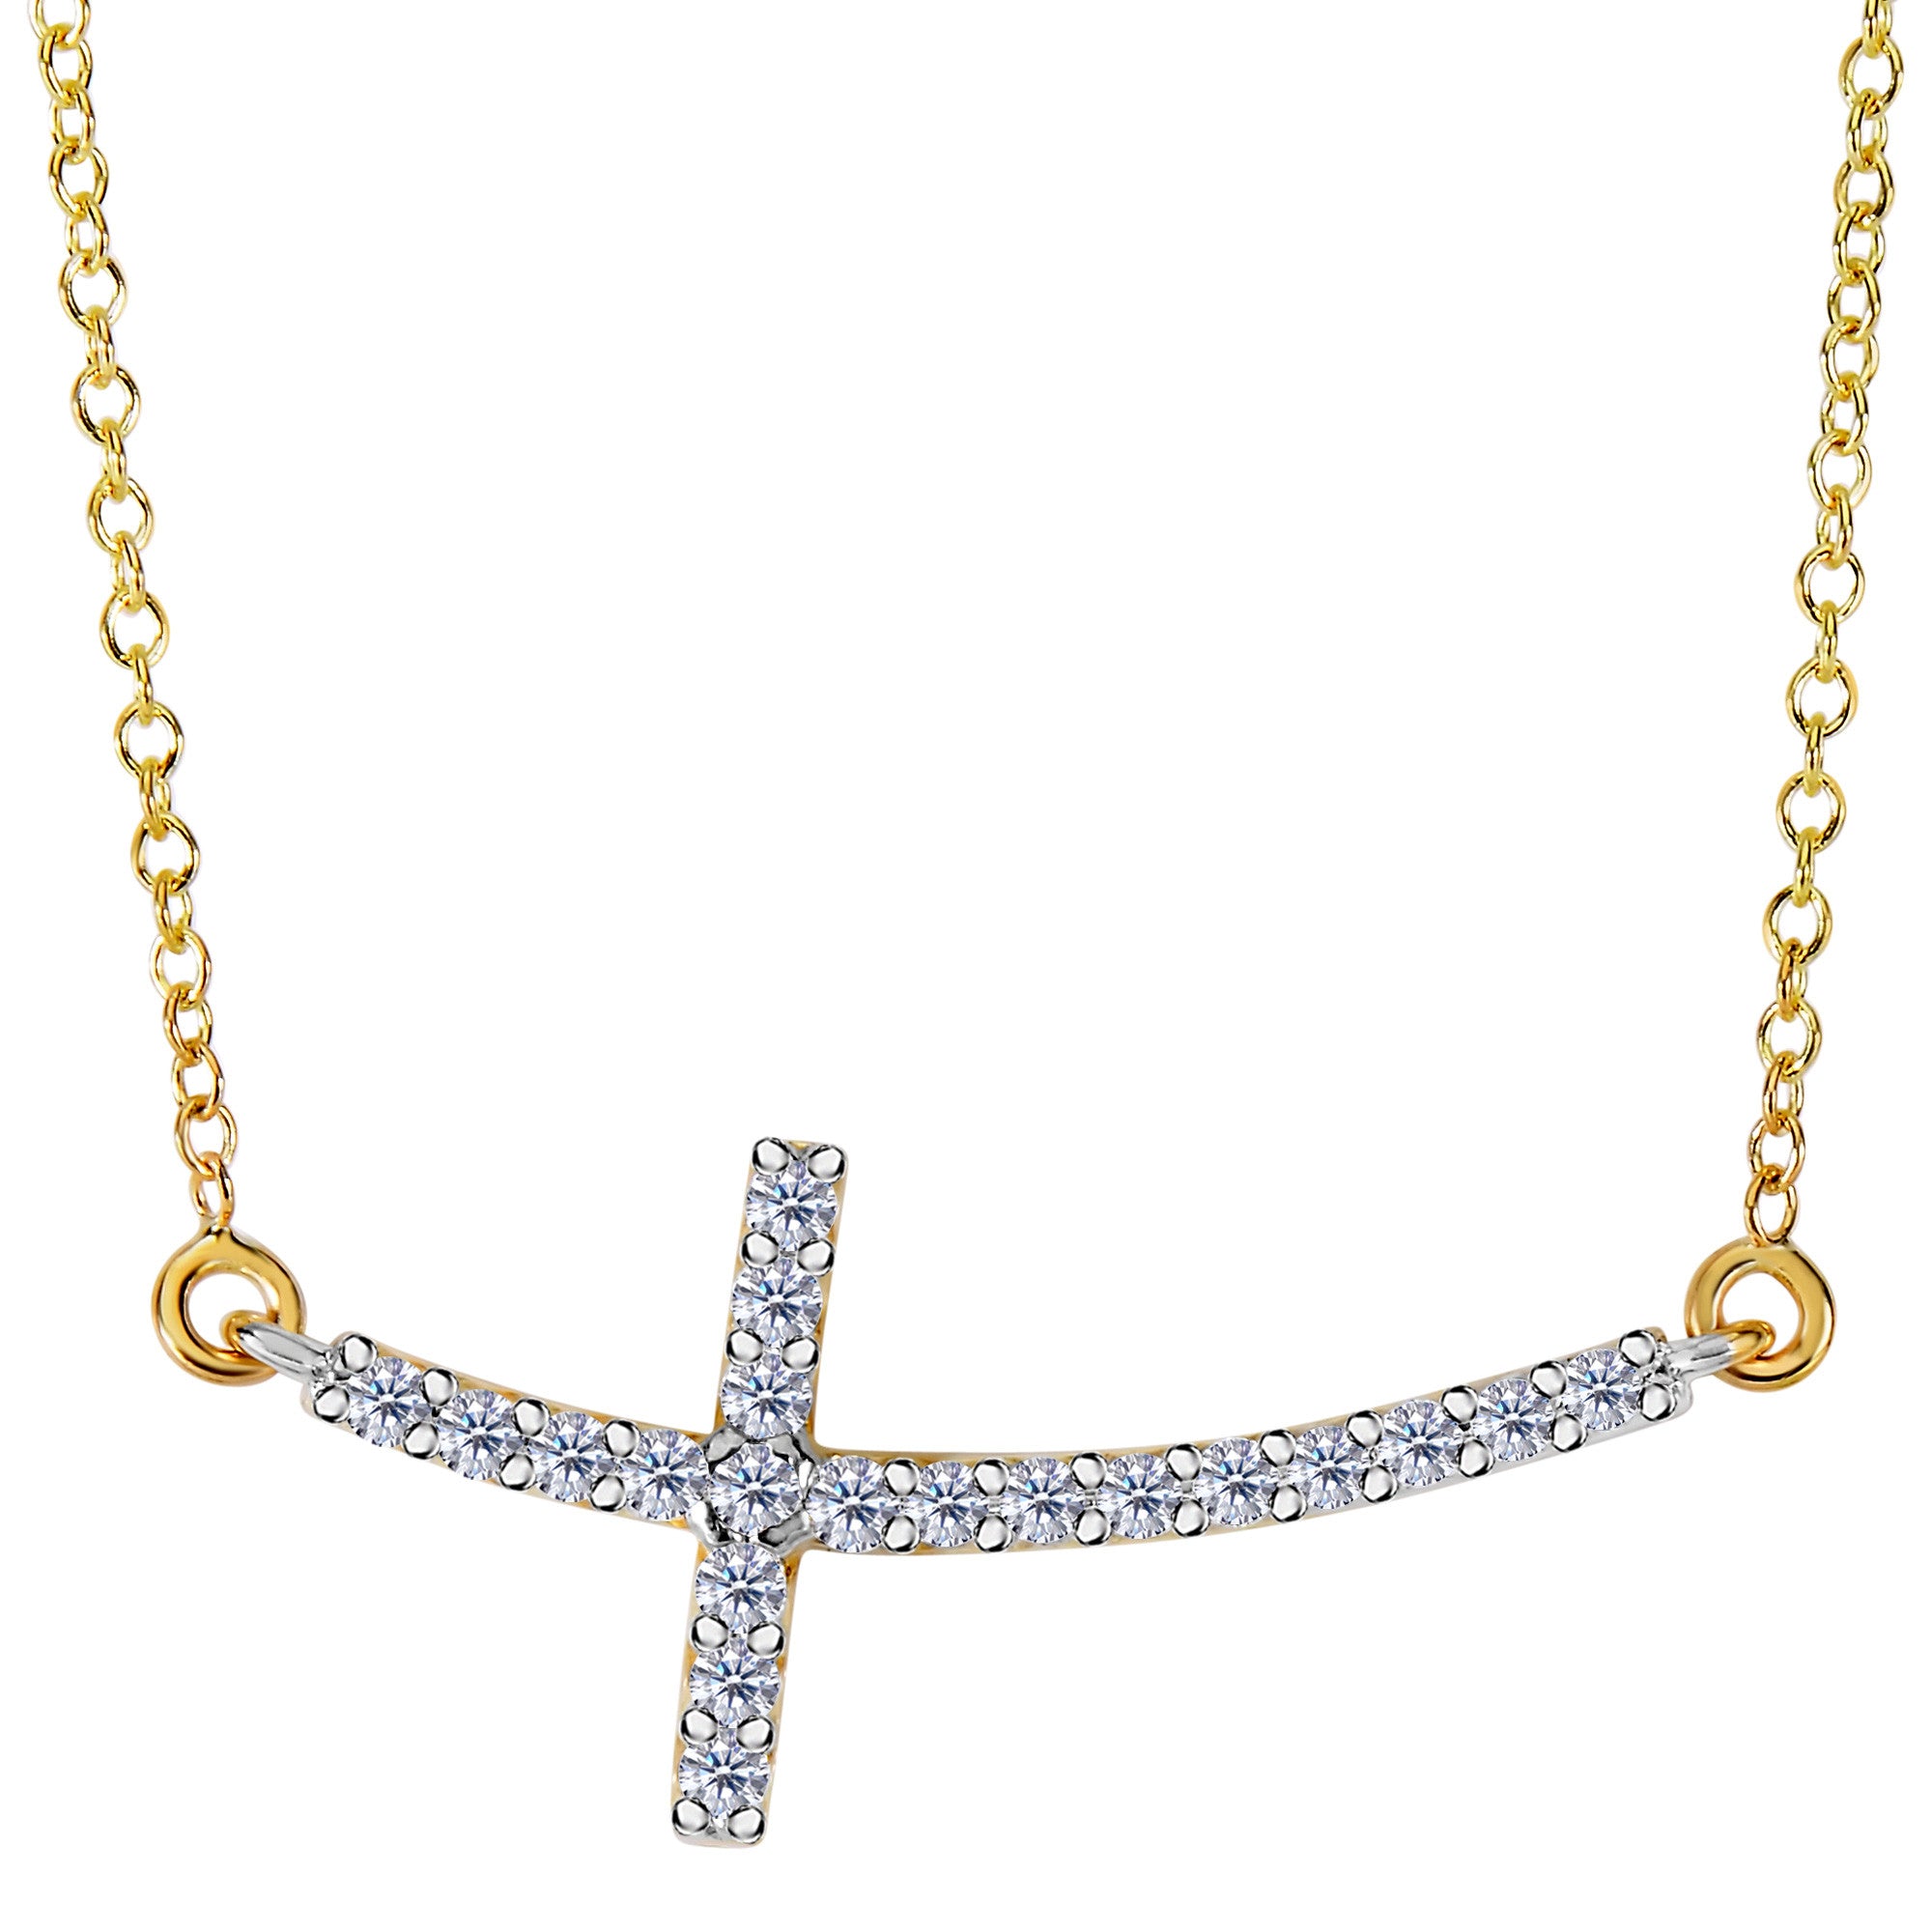 14k Yellow Gold With 0.22ct Diamonds Curved Side Ways Cross Necklace - 18 Inches - JewelryAffairs
 - 1